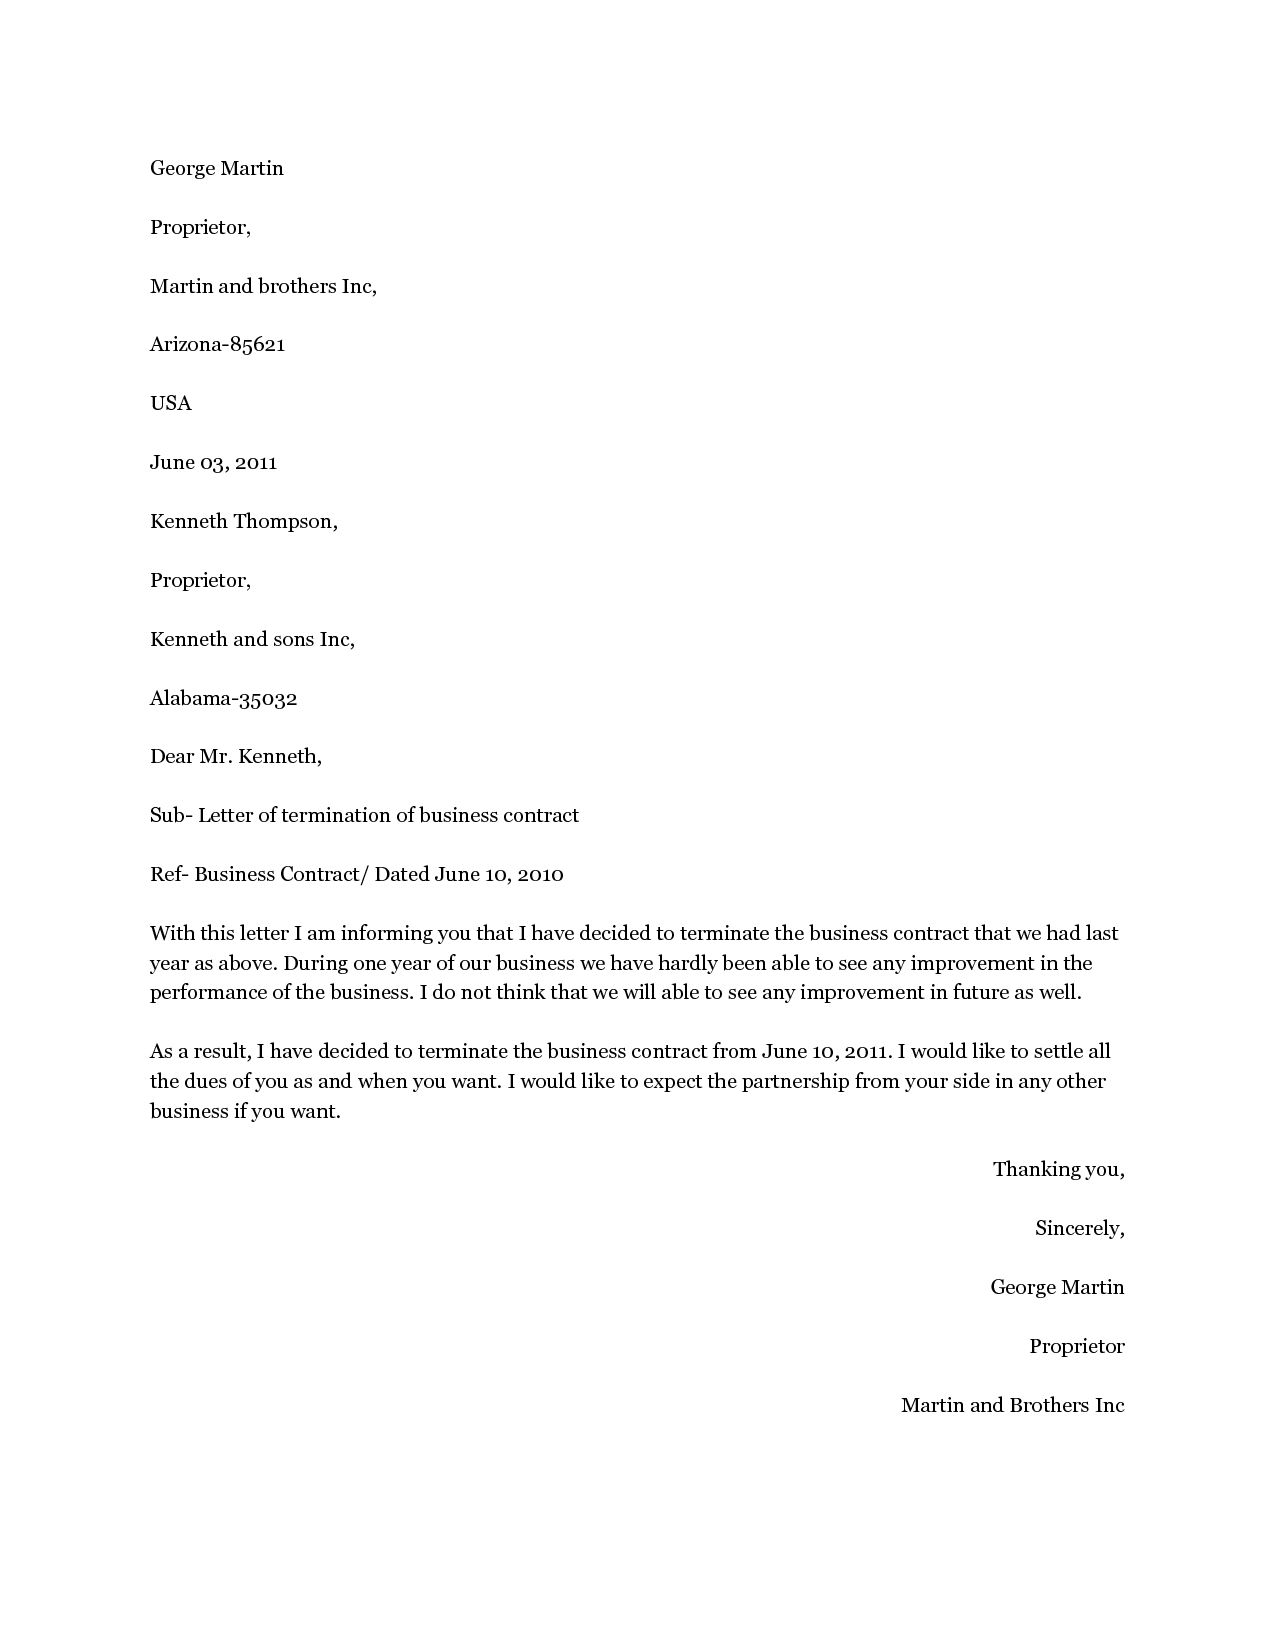 service contract termination letter template Collection-letter of contract termination monpence co 2-n